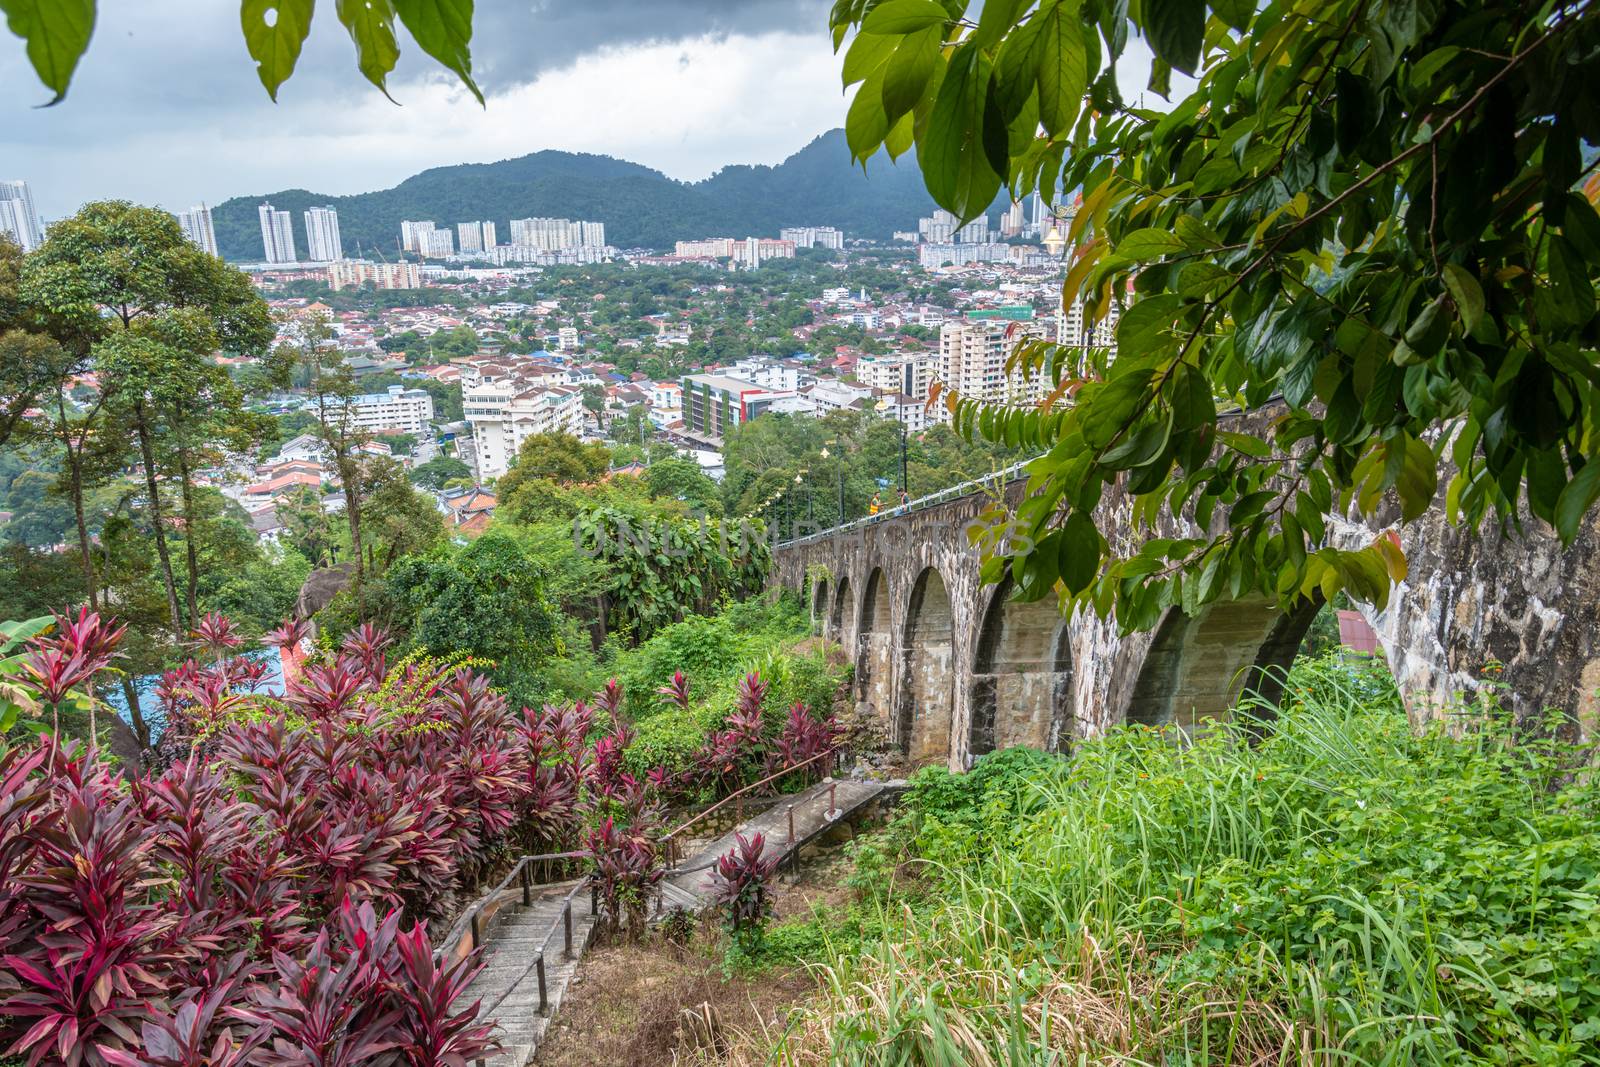 Penang Hill heritage trail walking down from top towards George Town in Malaysia by MXW_Stock